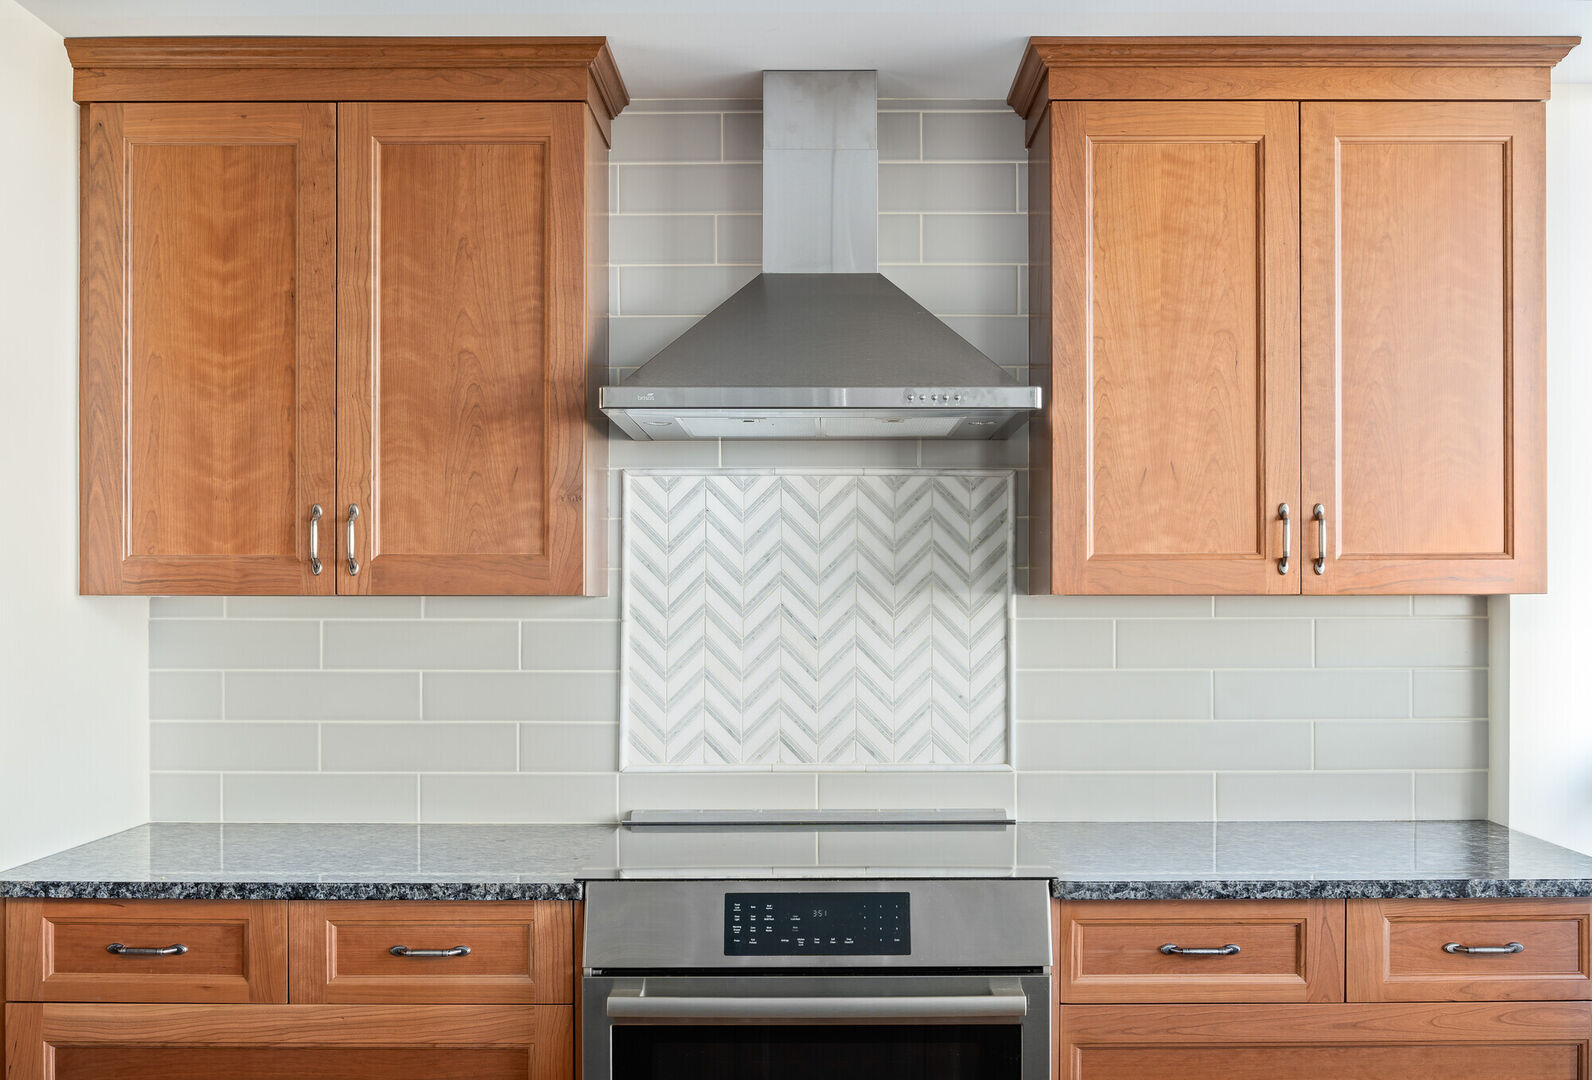 Modern kitchen renovation with subway tile, wood cabinets and chevron tile